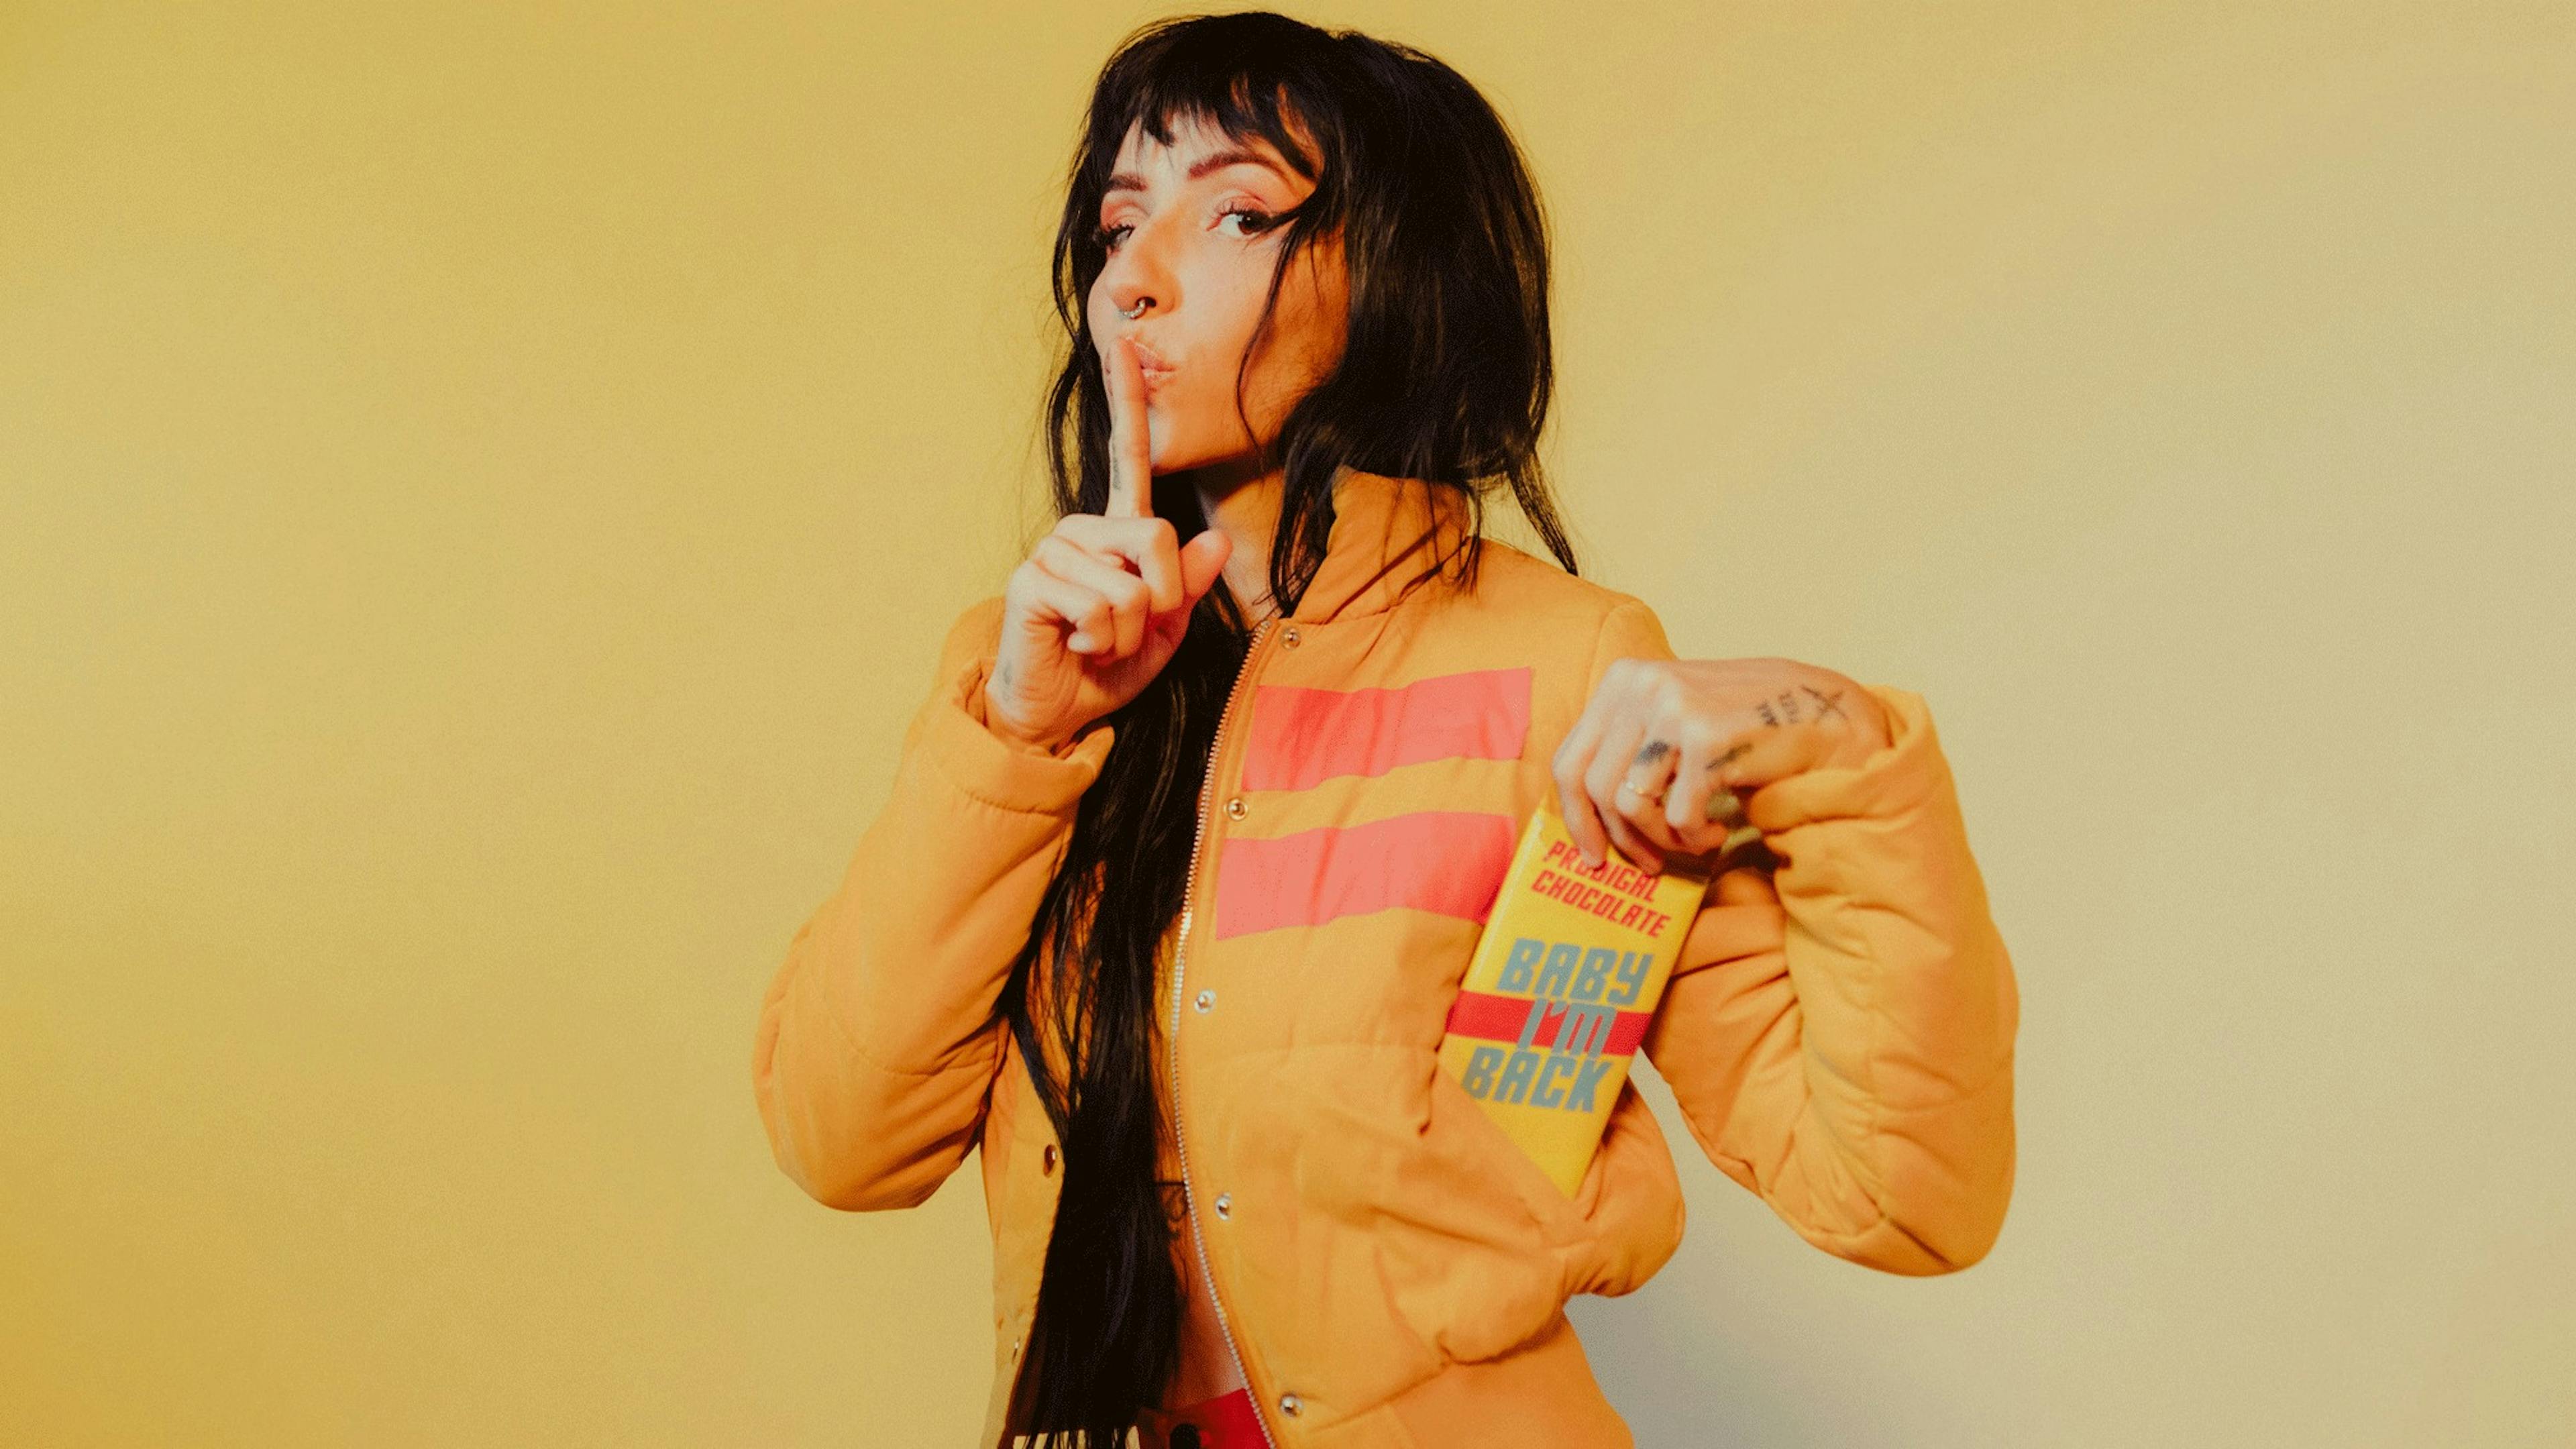 “I wanted to be an entertainment lawyer”: 13 Questions with Lights